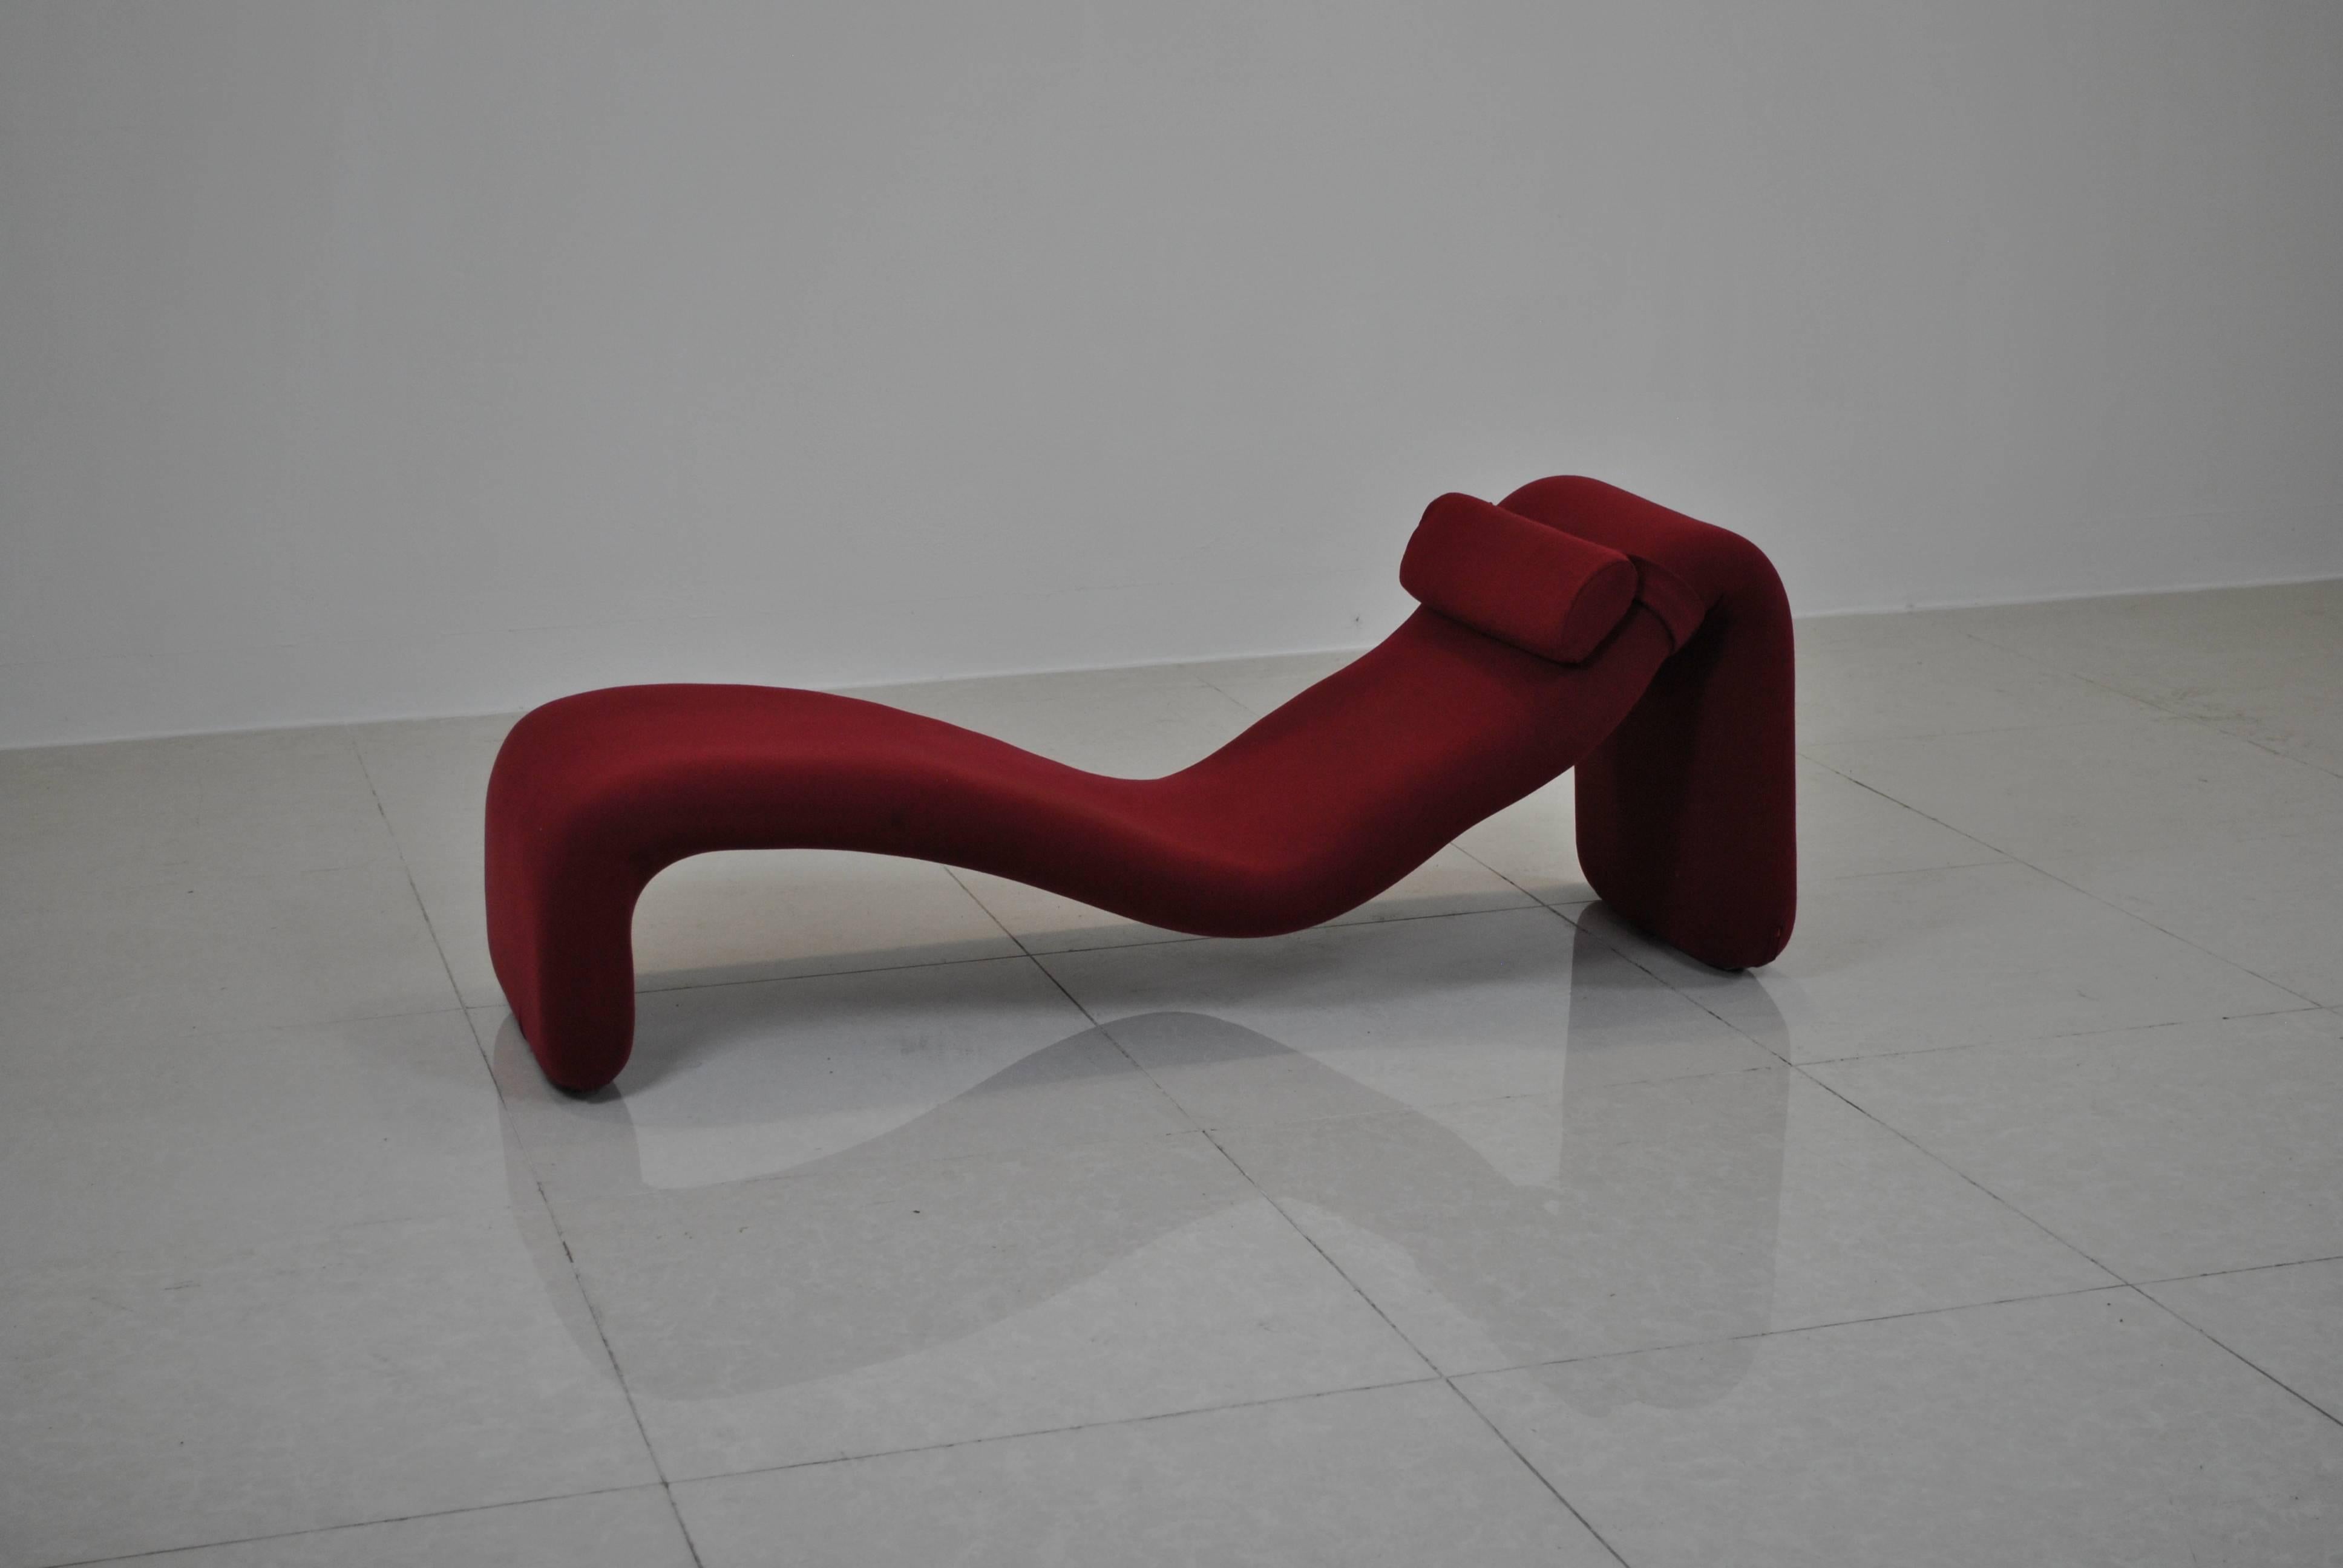 Space Age 'Djinn' Chaise Longue by Olivier Mourgue, France, circa 1963